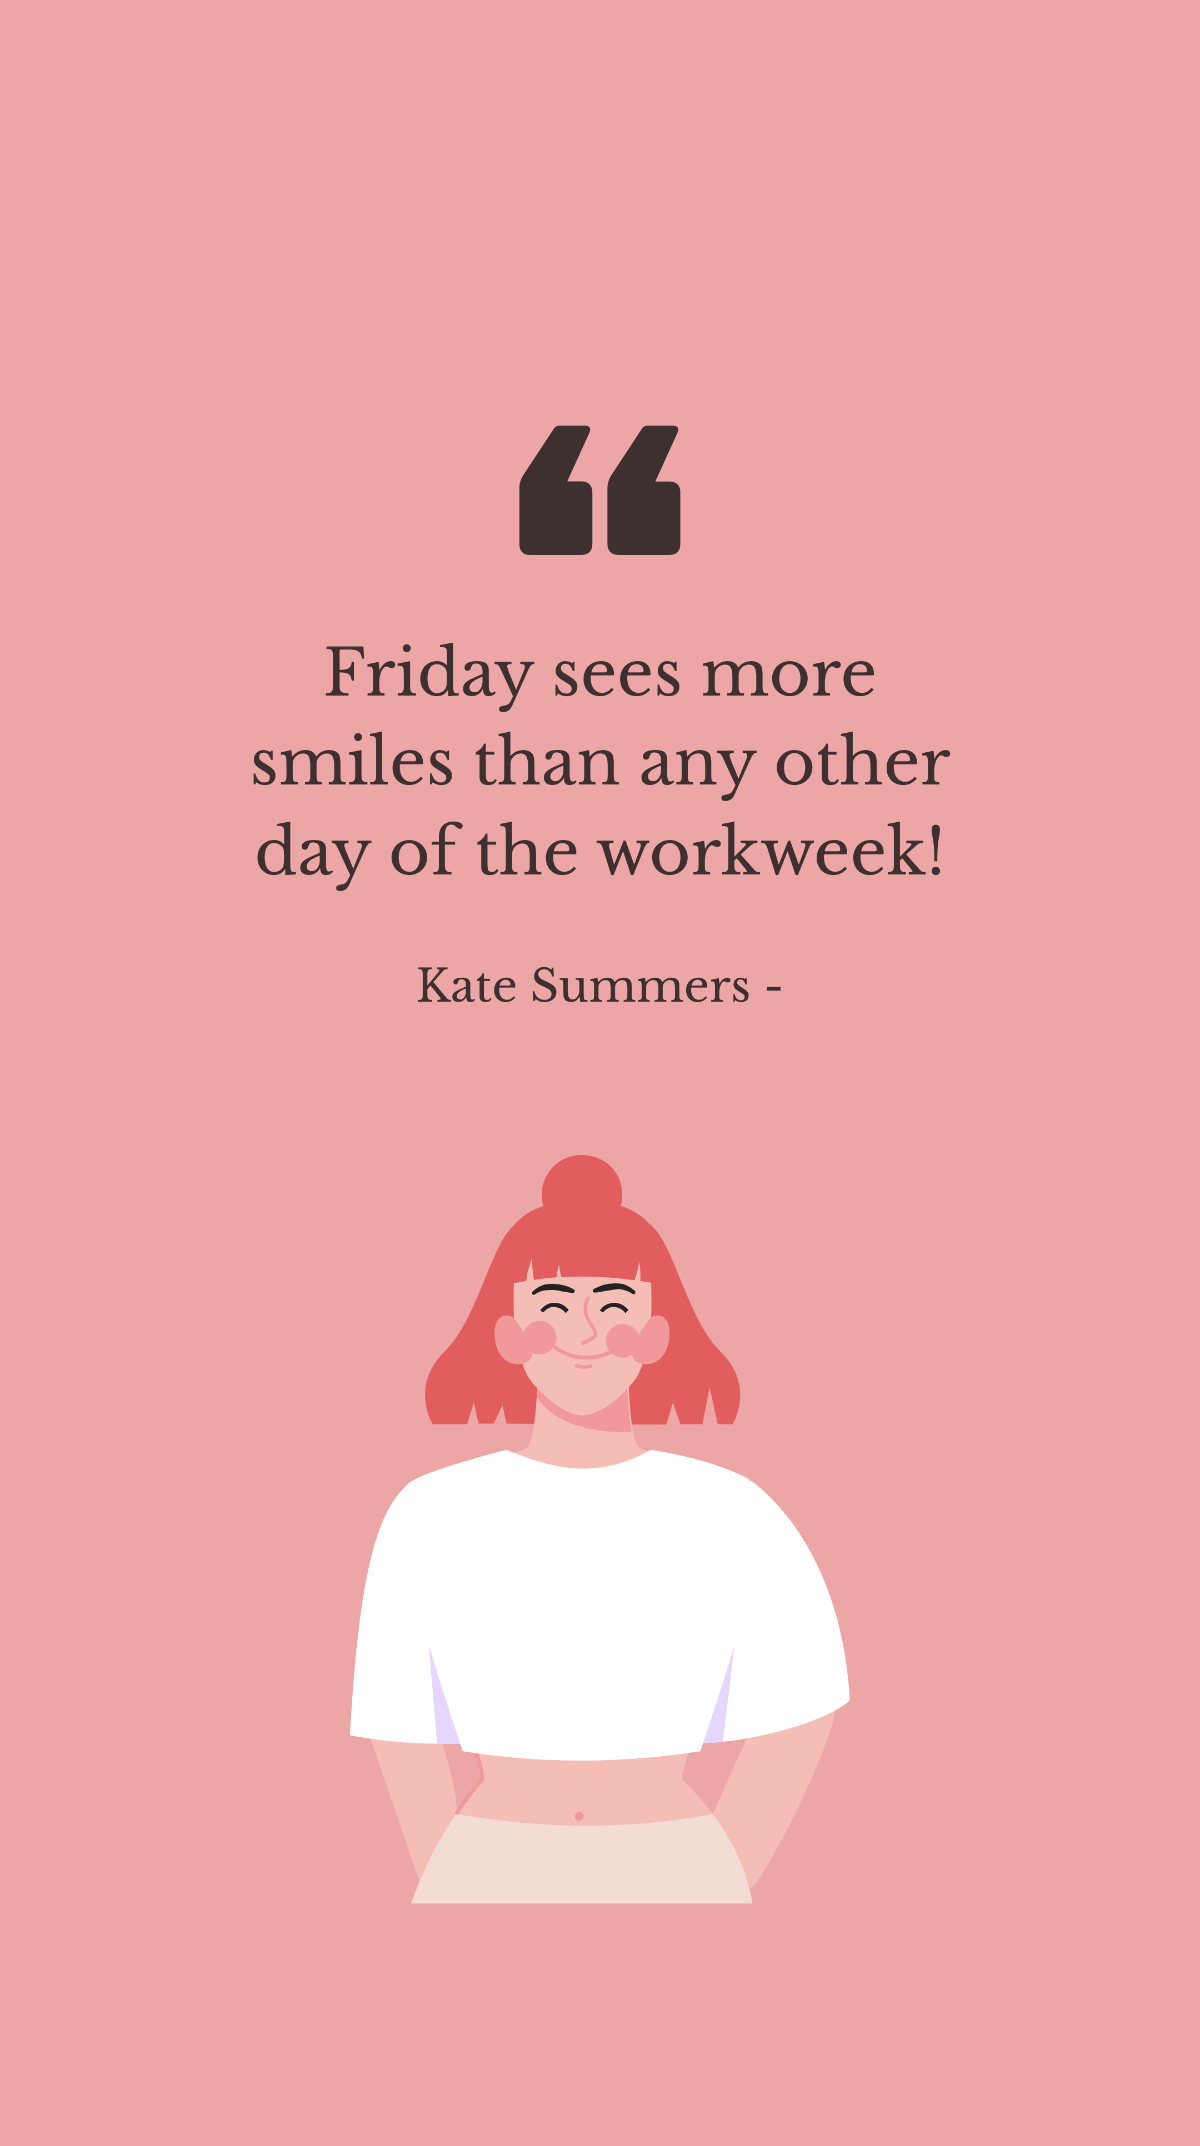 Kate Summers - Friday sees more smiles than any other day of the workweek! Template